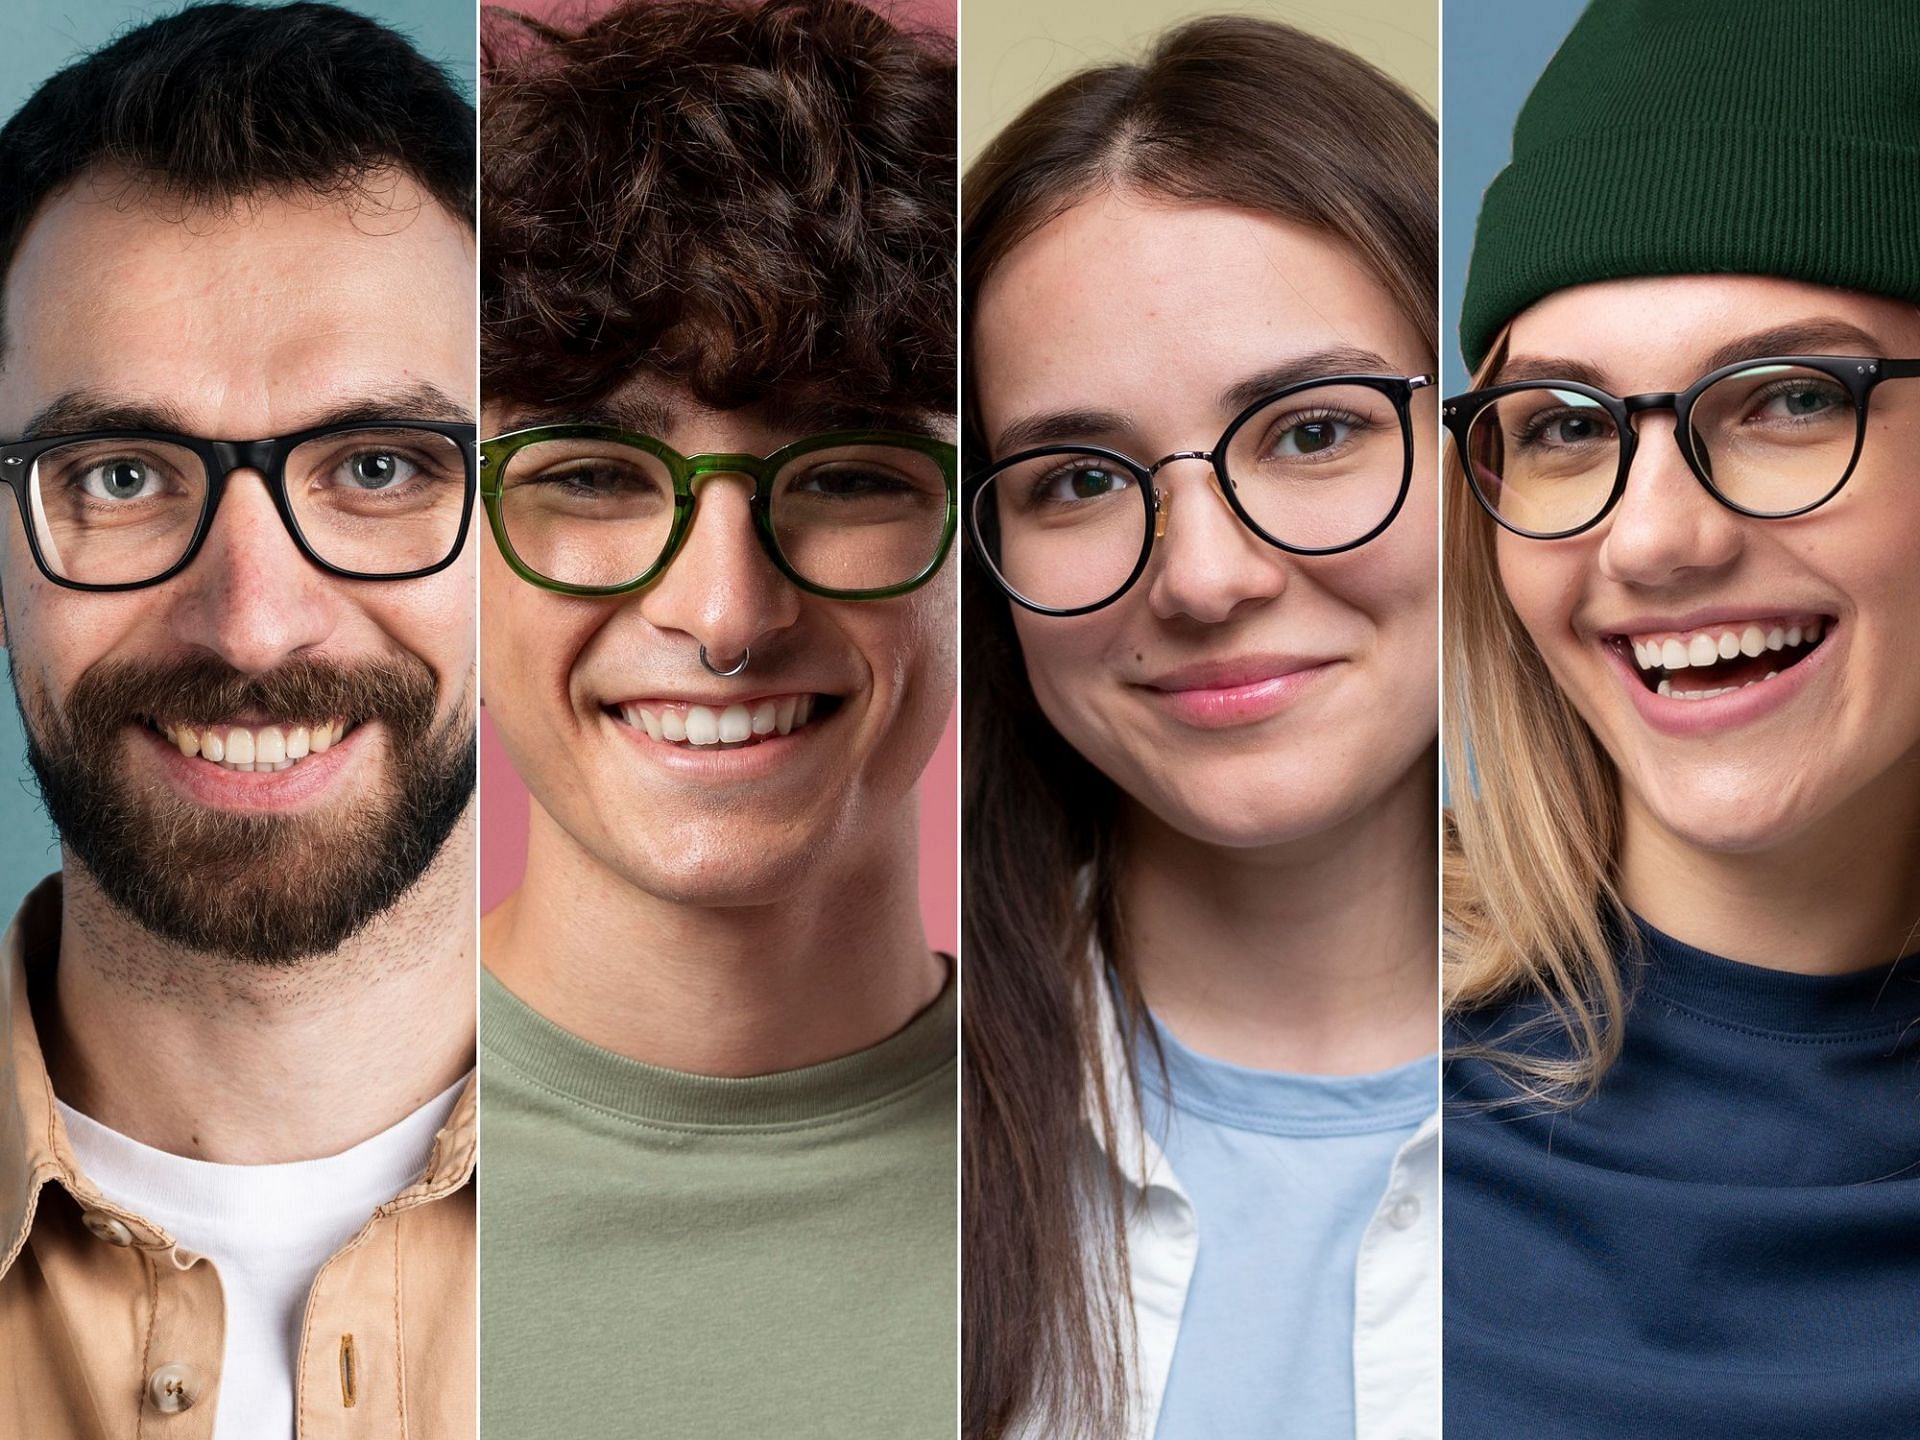 Switch to glasses instead of using lenses all the time (Image by freepik)